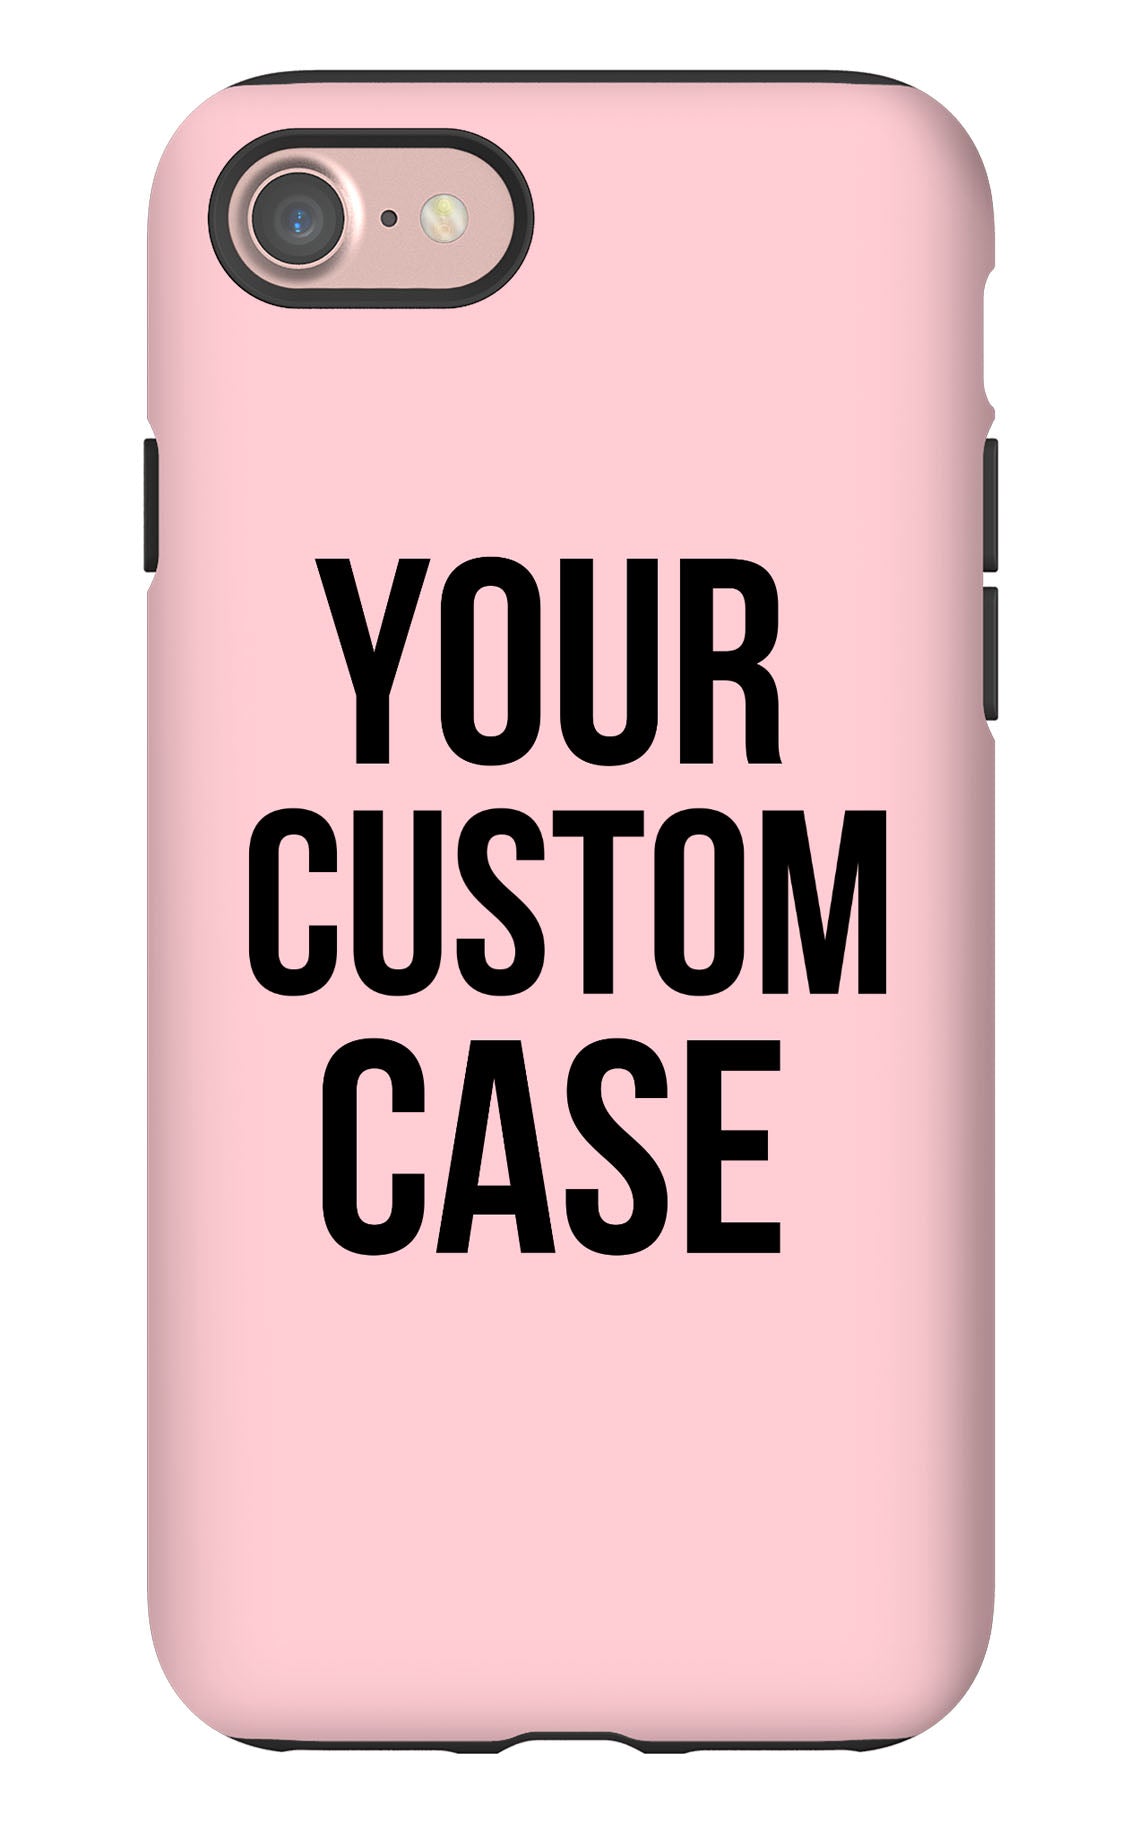 Custom iPhone 7 Extra Protective Bumper Case - Your Custom Design in Cart will be Shipped - Pixly Case